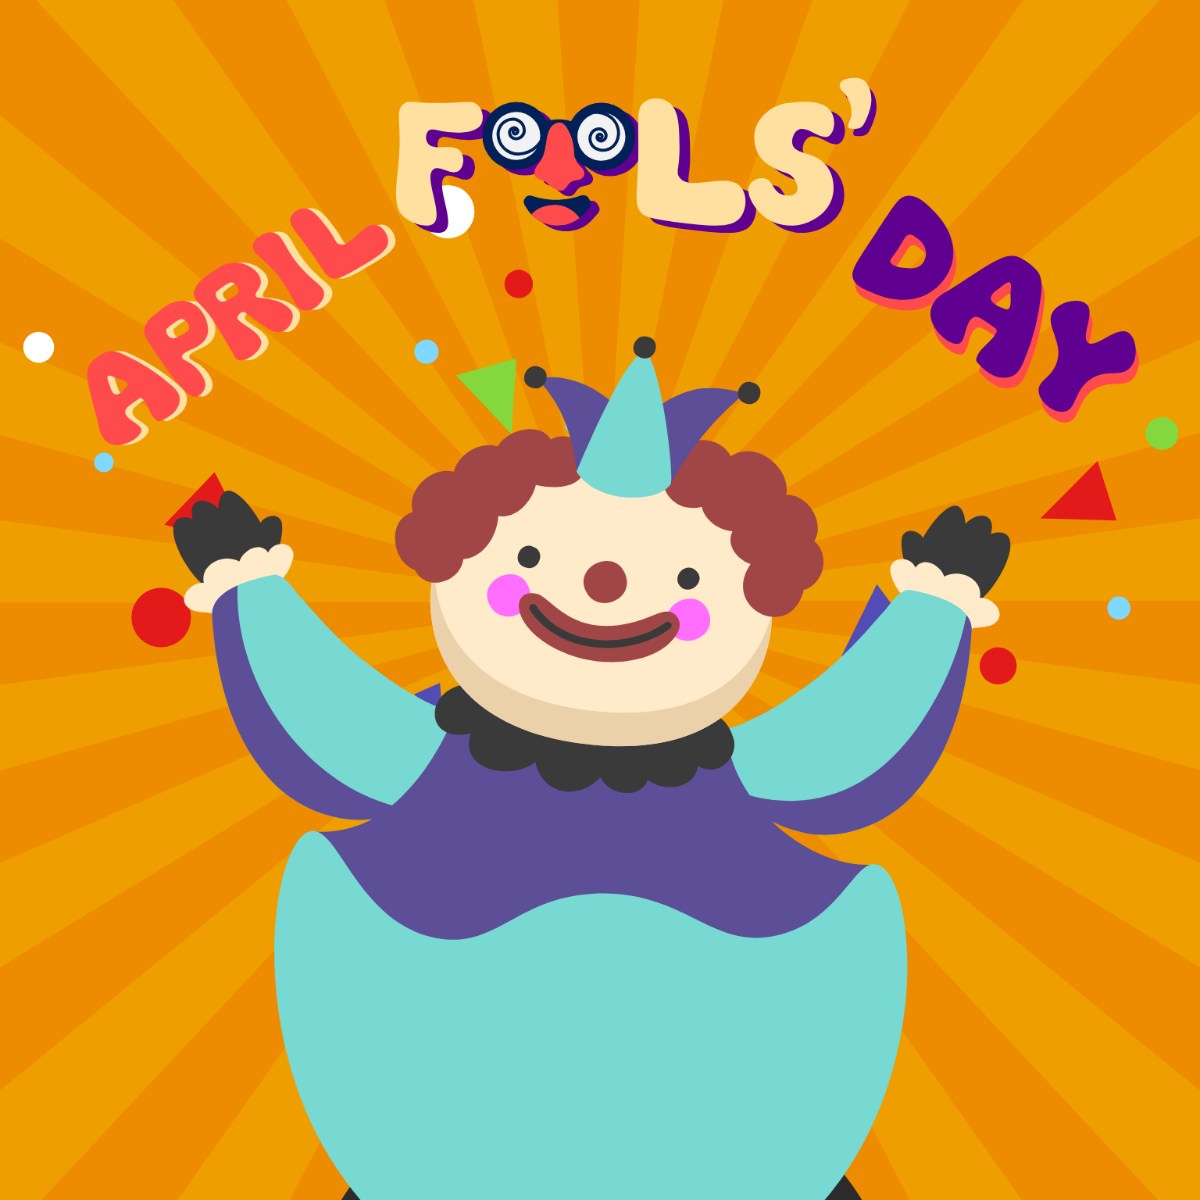 Free Colorful April Fools’ Day Vector Template